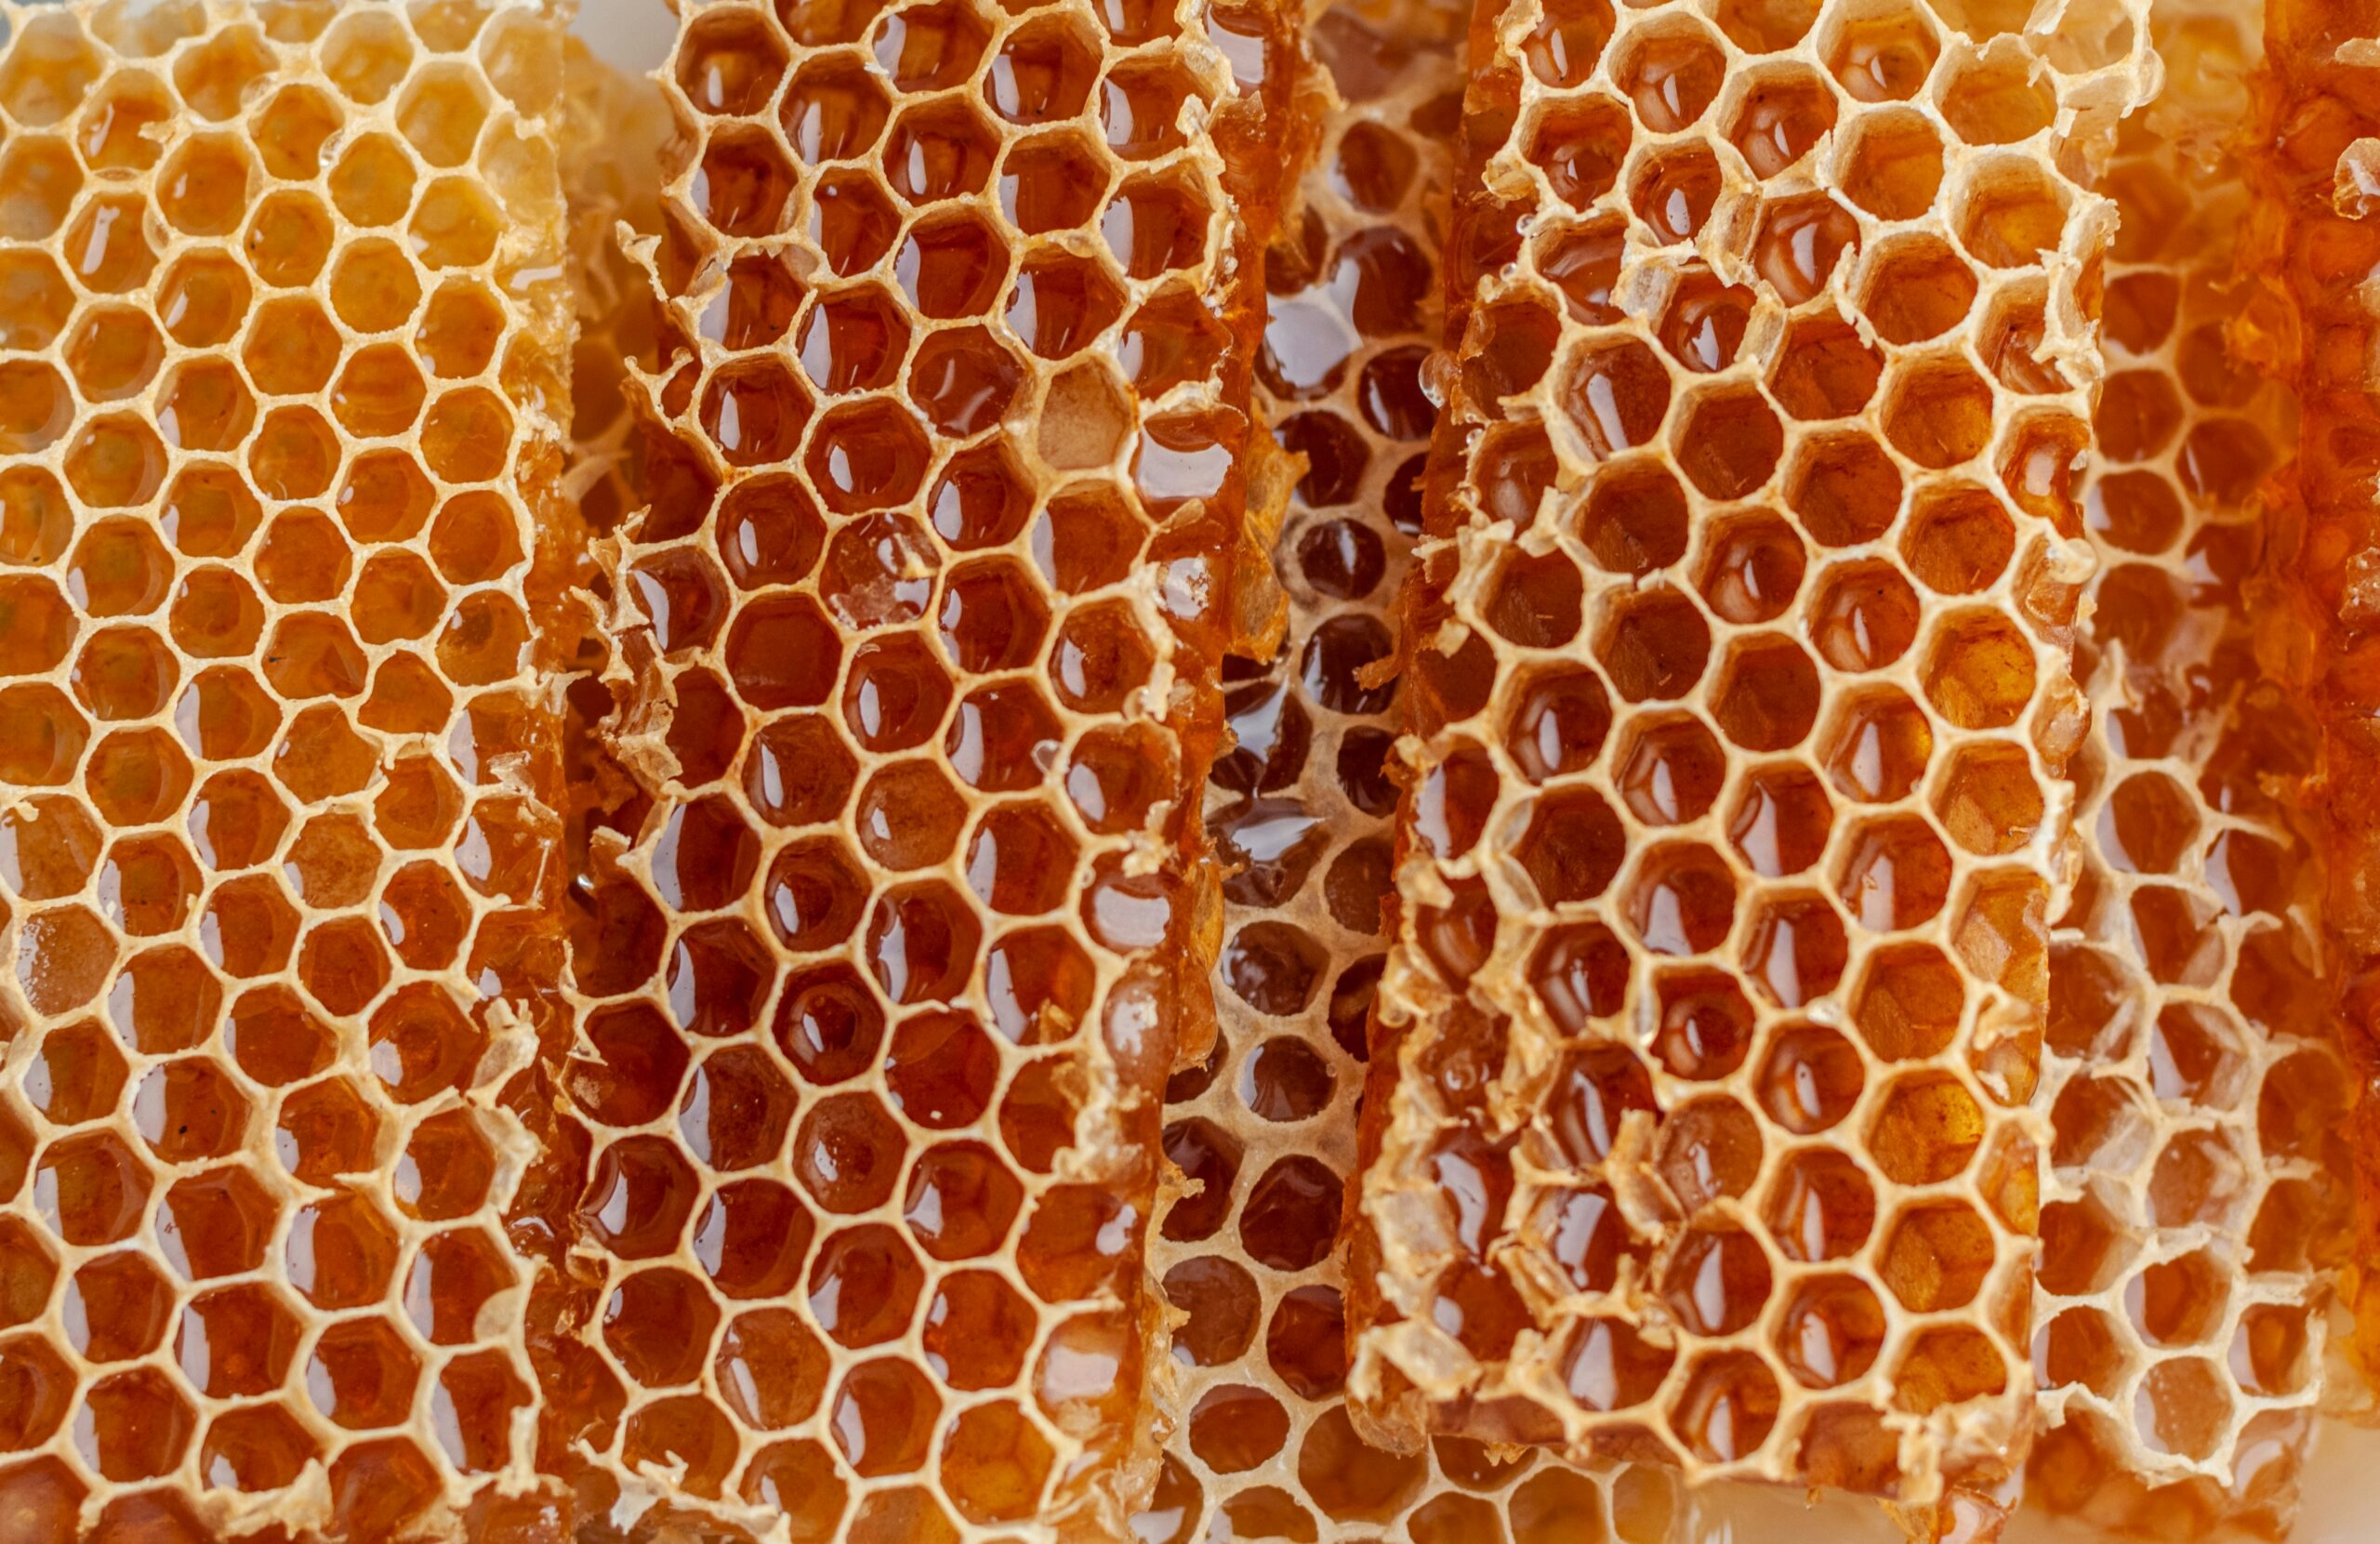 Honey: What Is, Nutritional Value, Health Benefits, Uses, and More